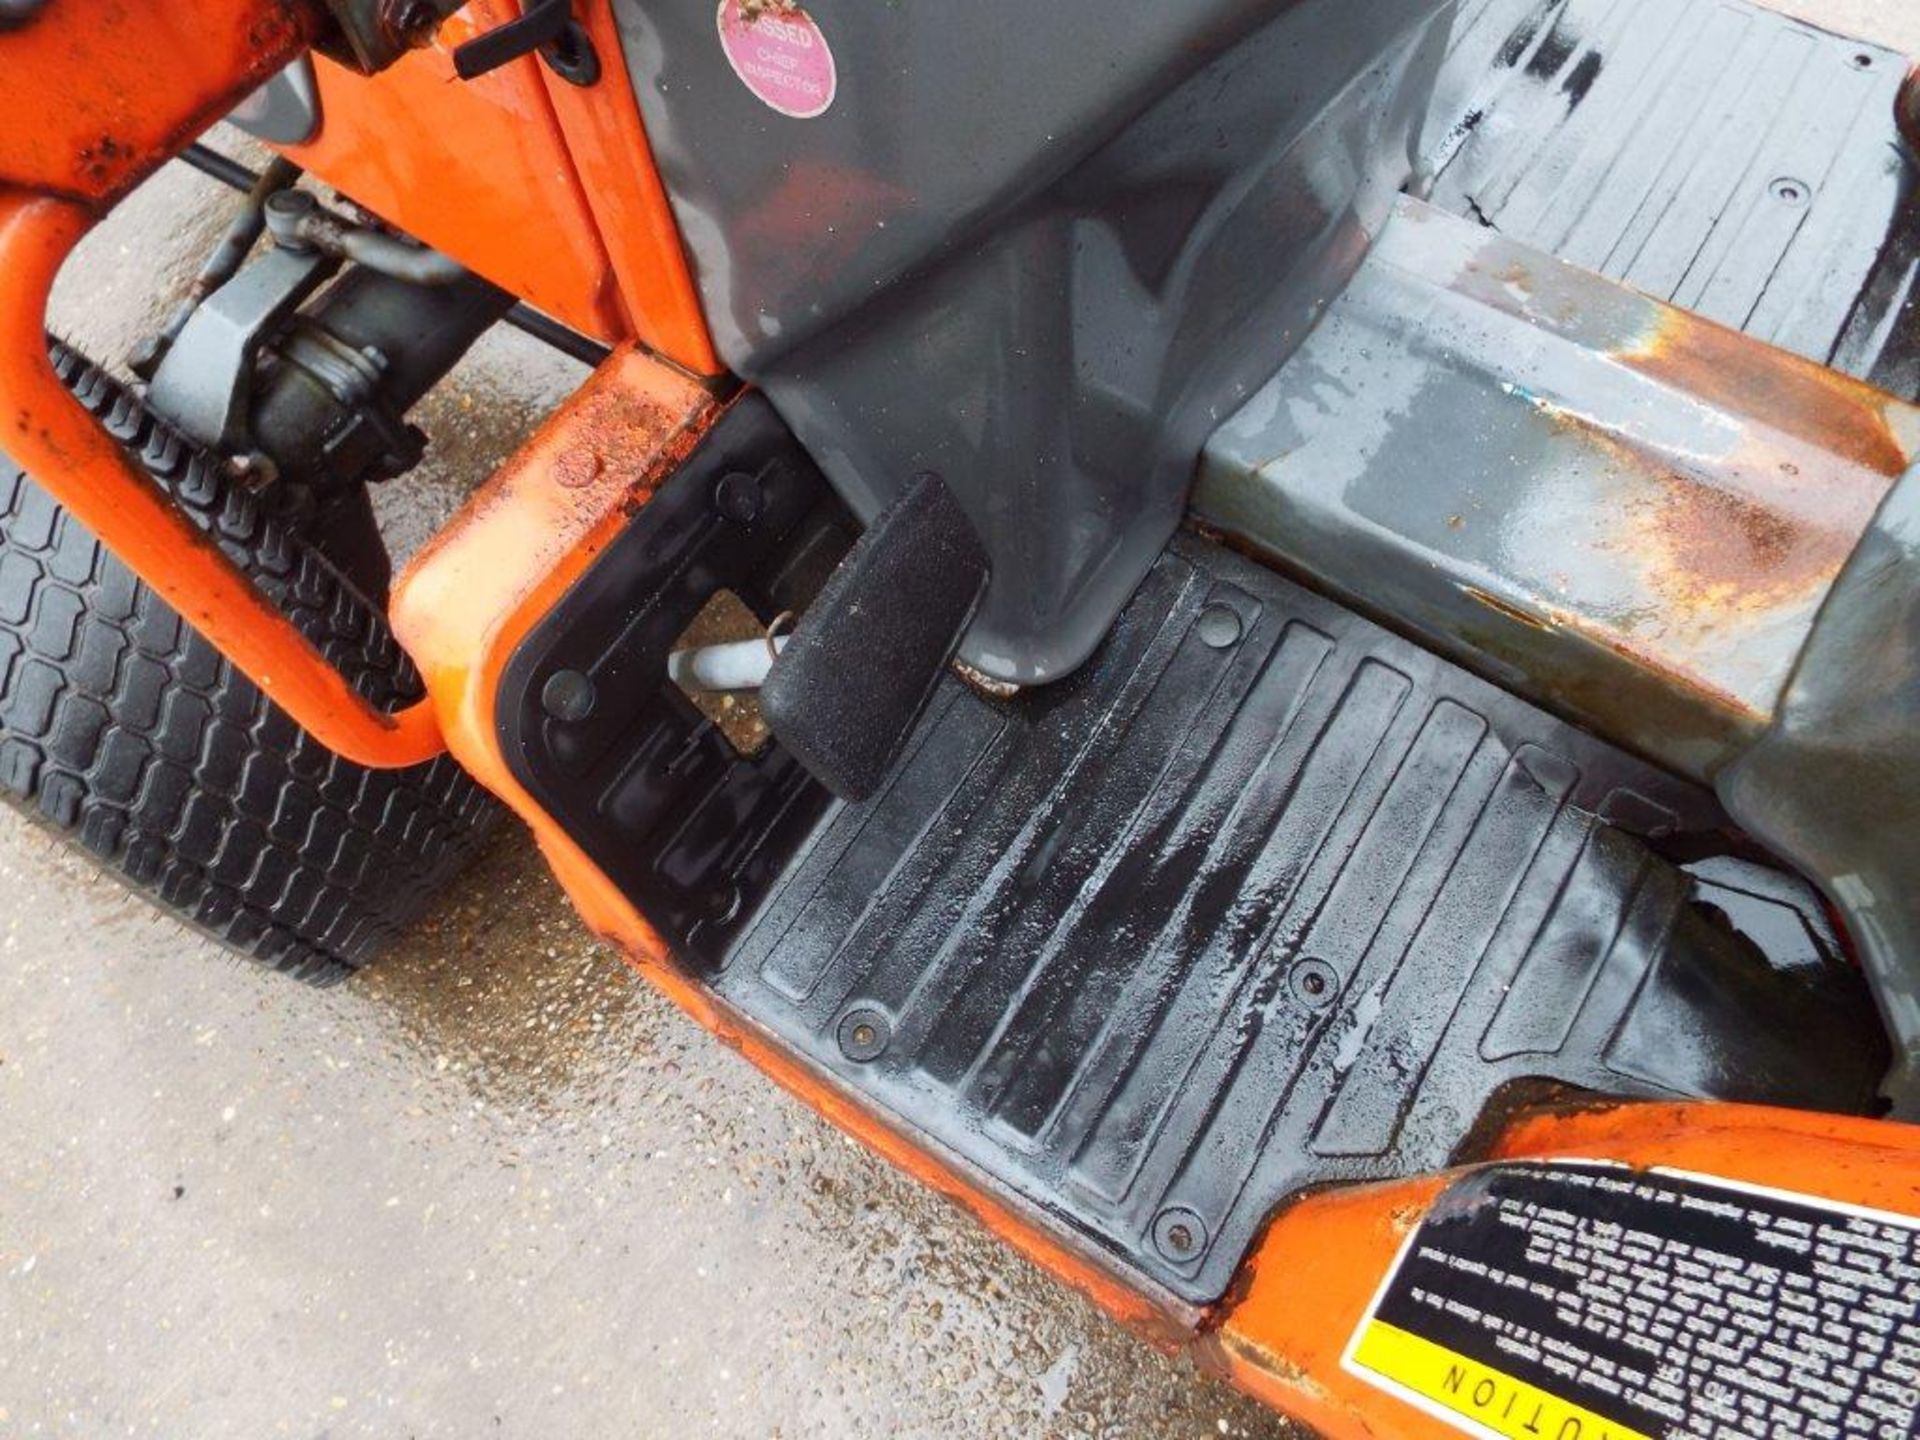 Kubota B1410D 4WD Diesel Powered Compact Tractor with Hydraulic Snow Plough Attachment - Image 17 of 25